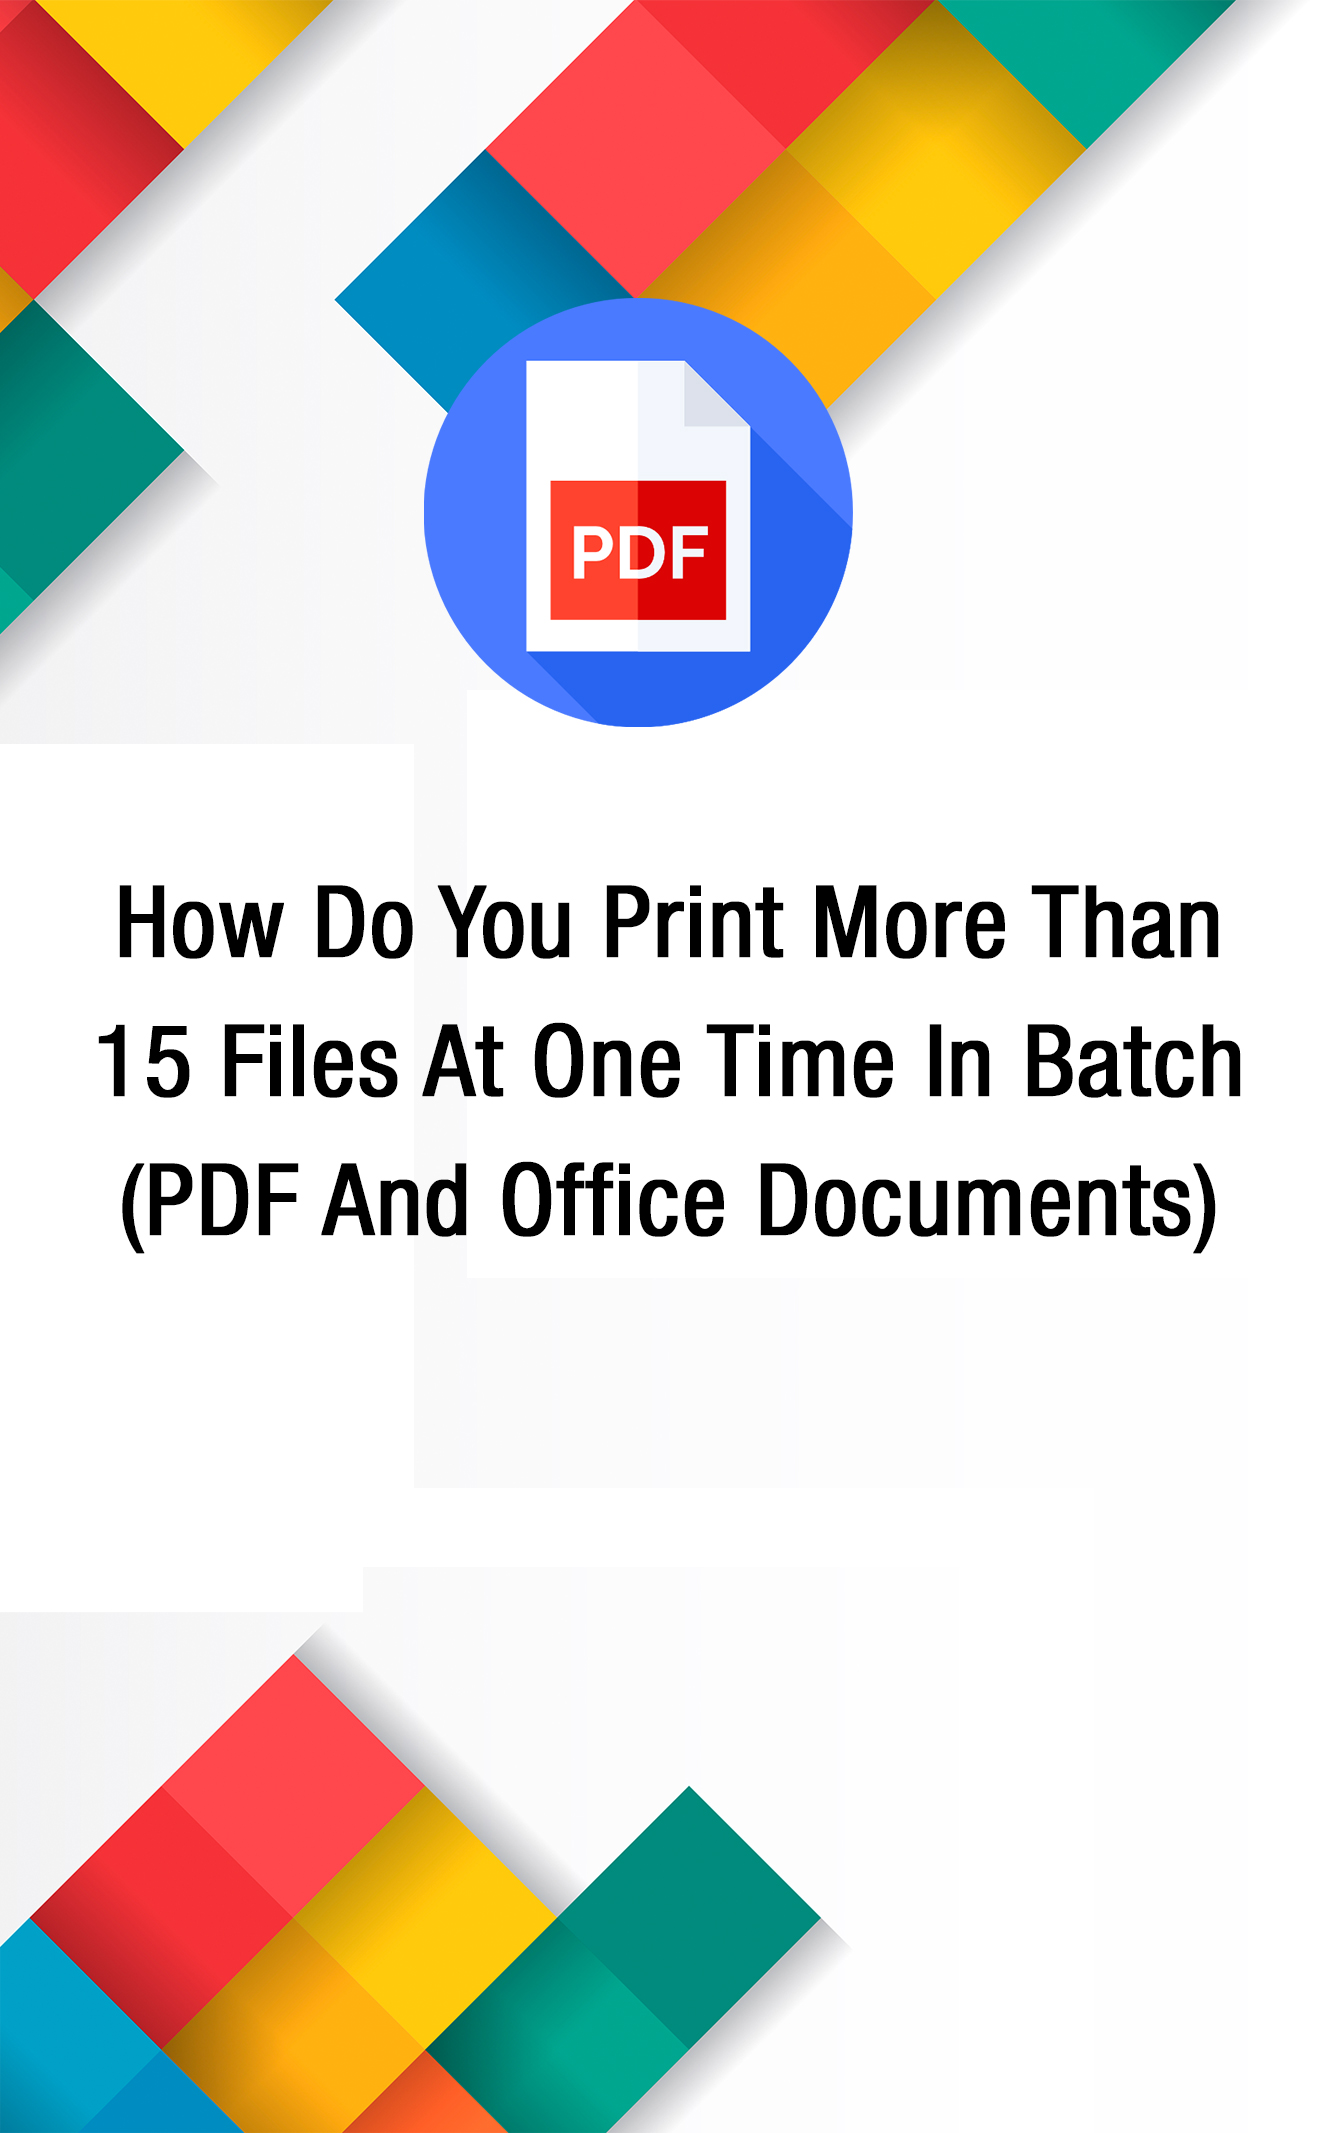 How-Do-You-Print-More-Than-15-Files-At-One-Time-In-Batch-PDF-And-Office-Documents